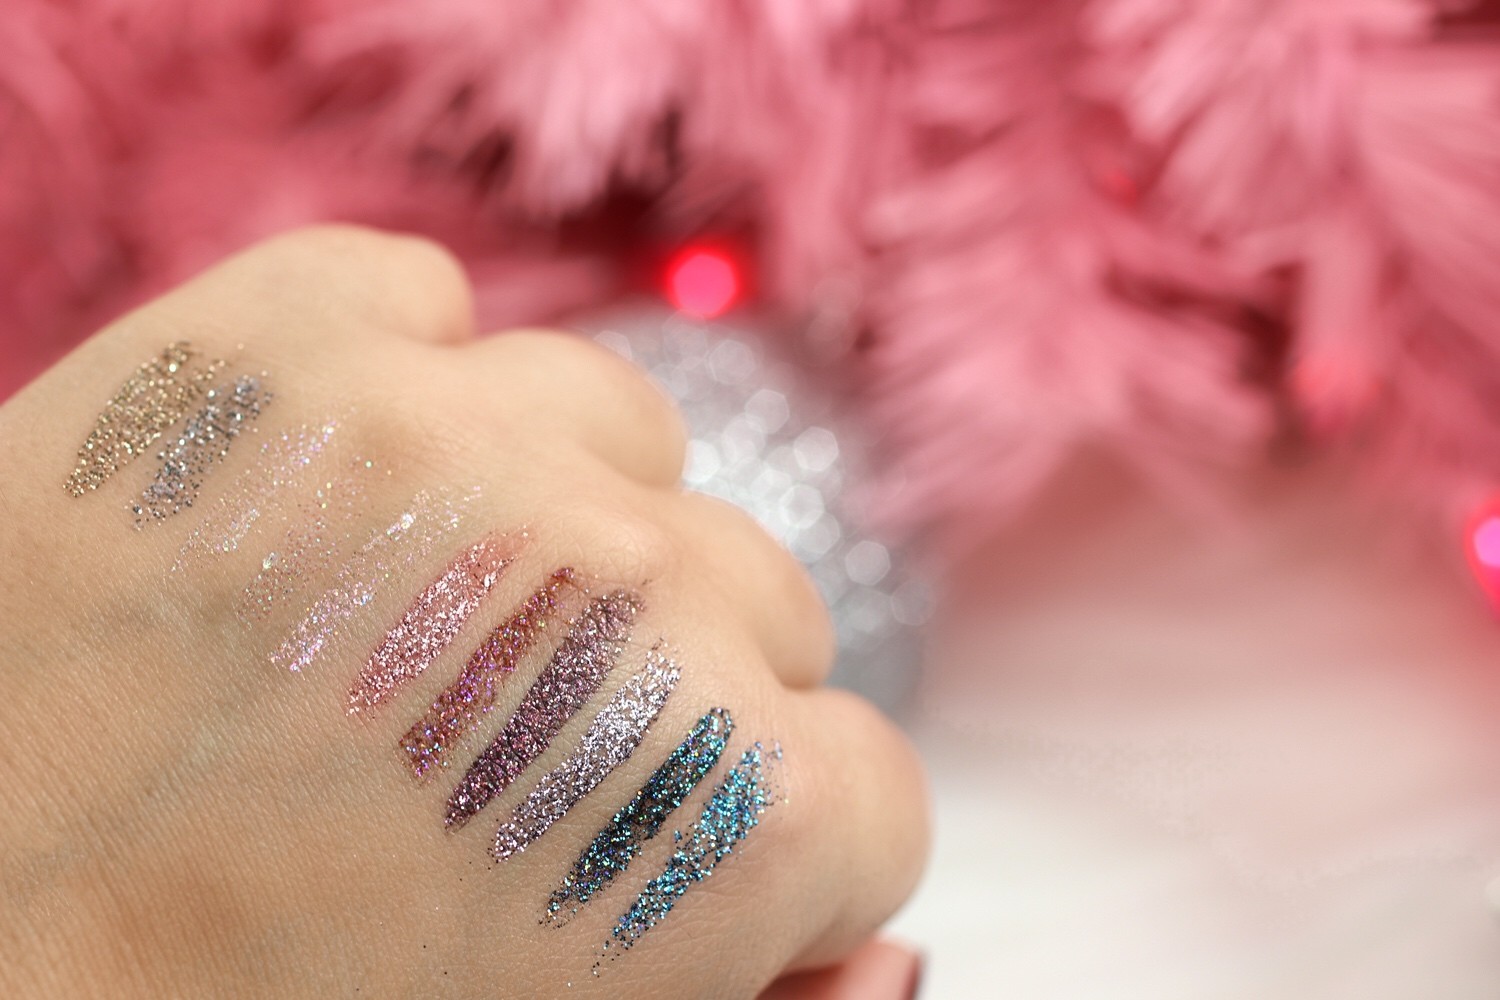 Urban Decay Heavy Metal Glitter Eyeliner Swatches